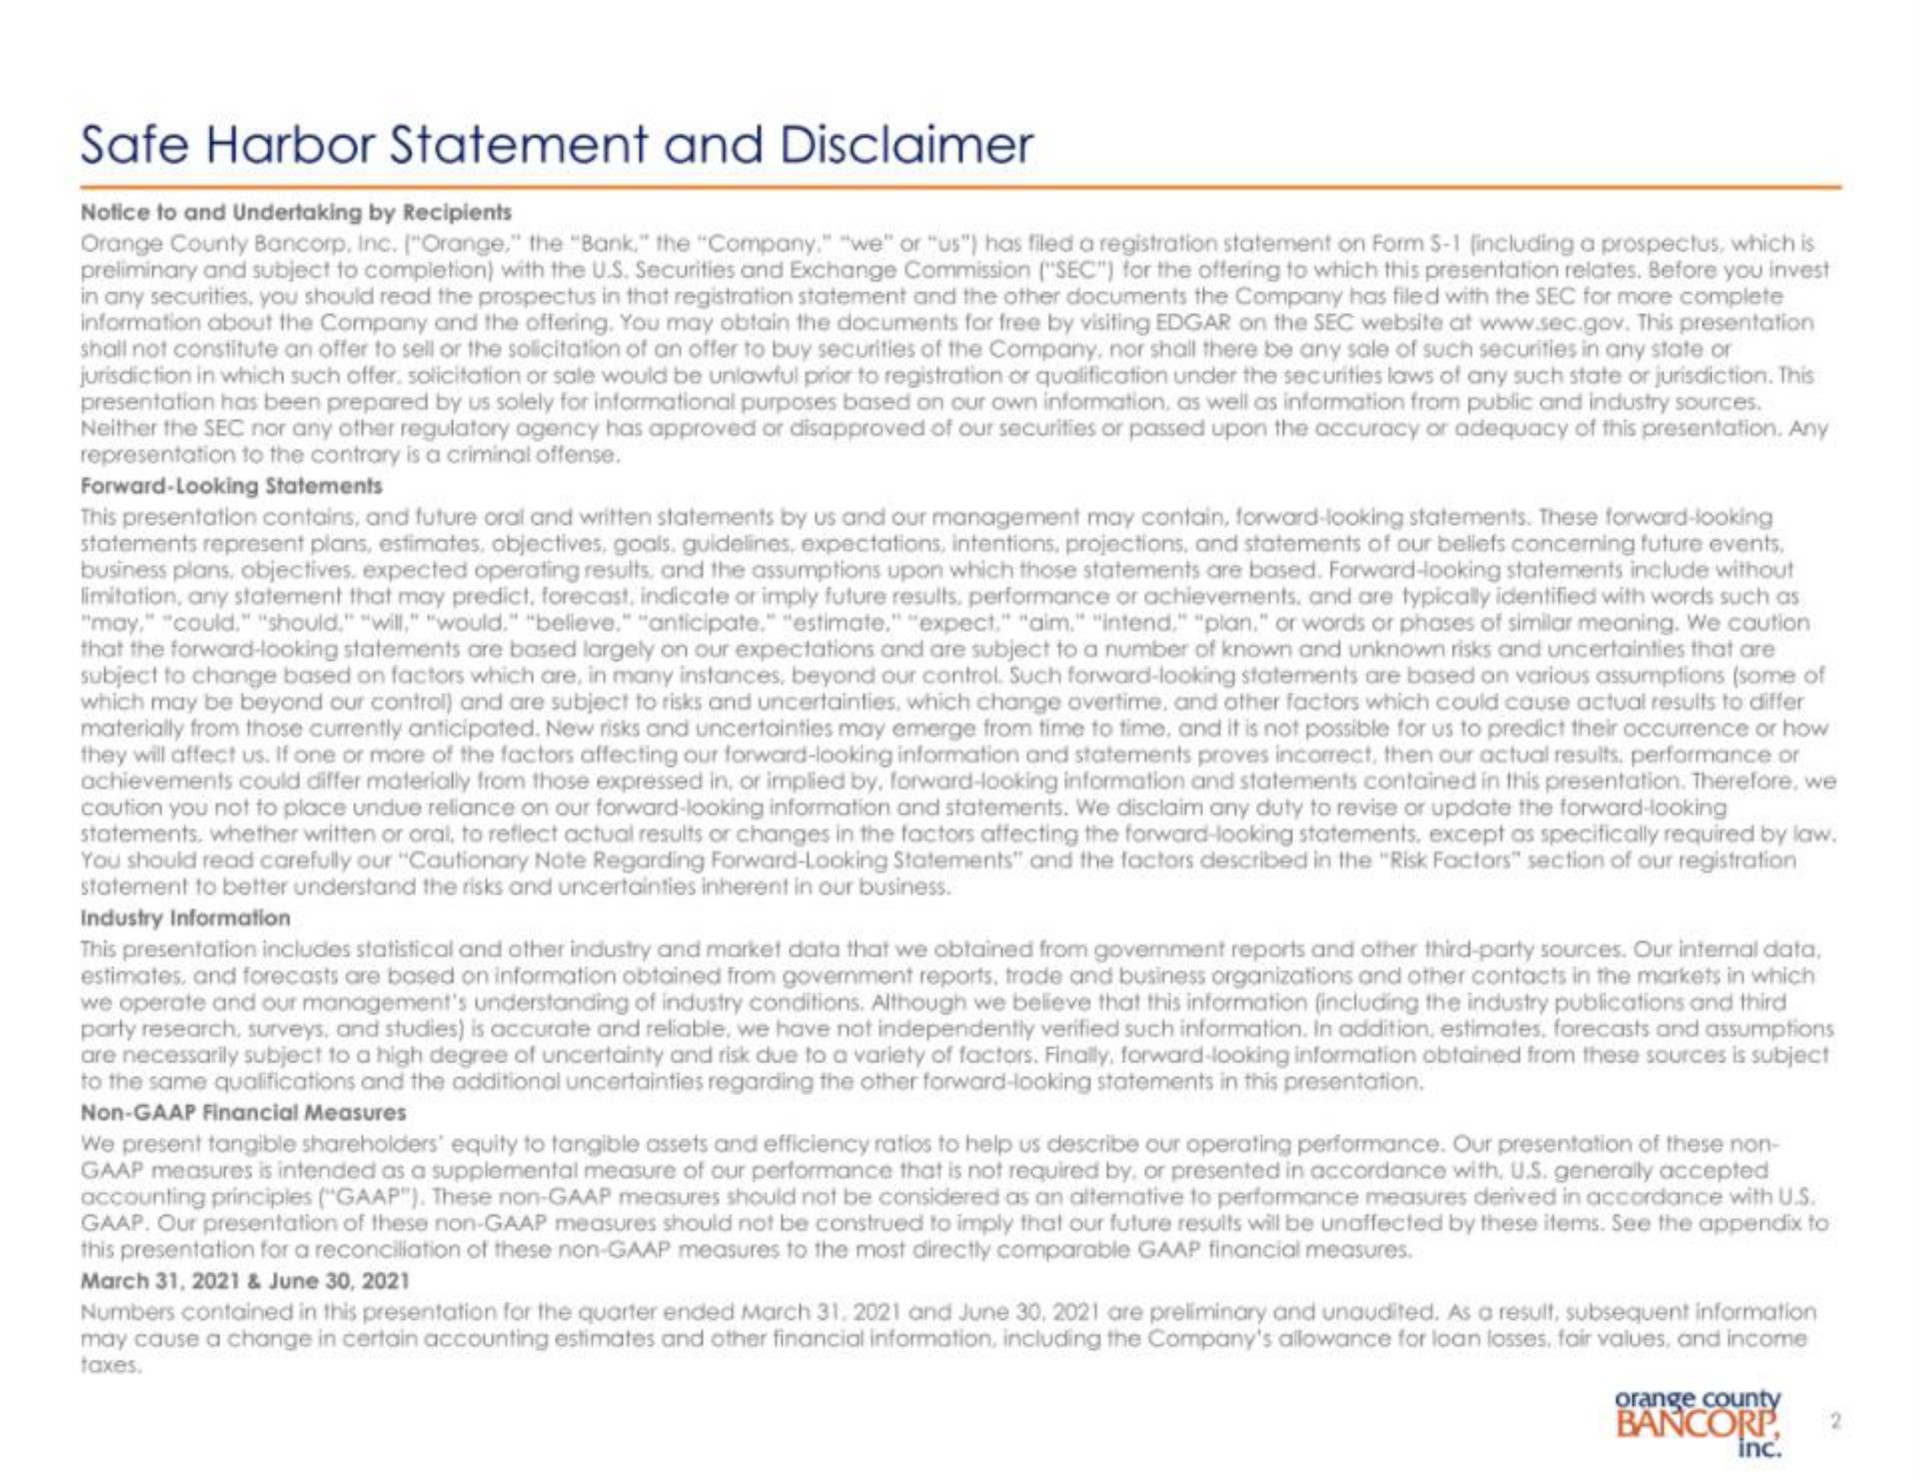 safe harbor statement and disclaimer | Orange County Bancorp